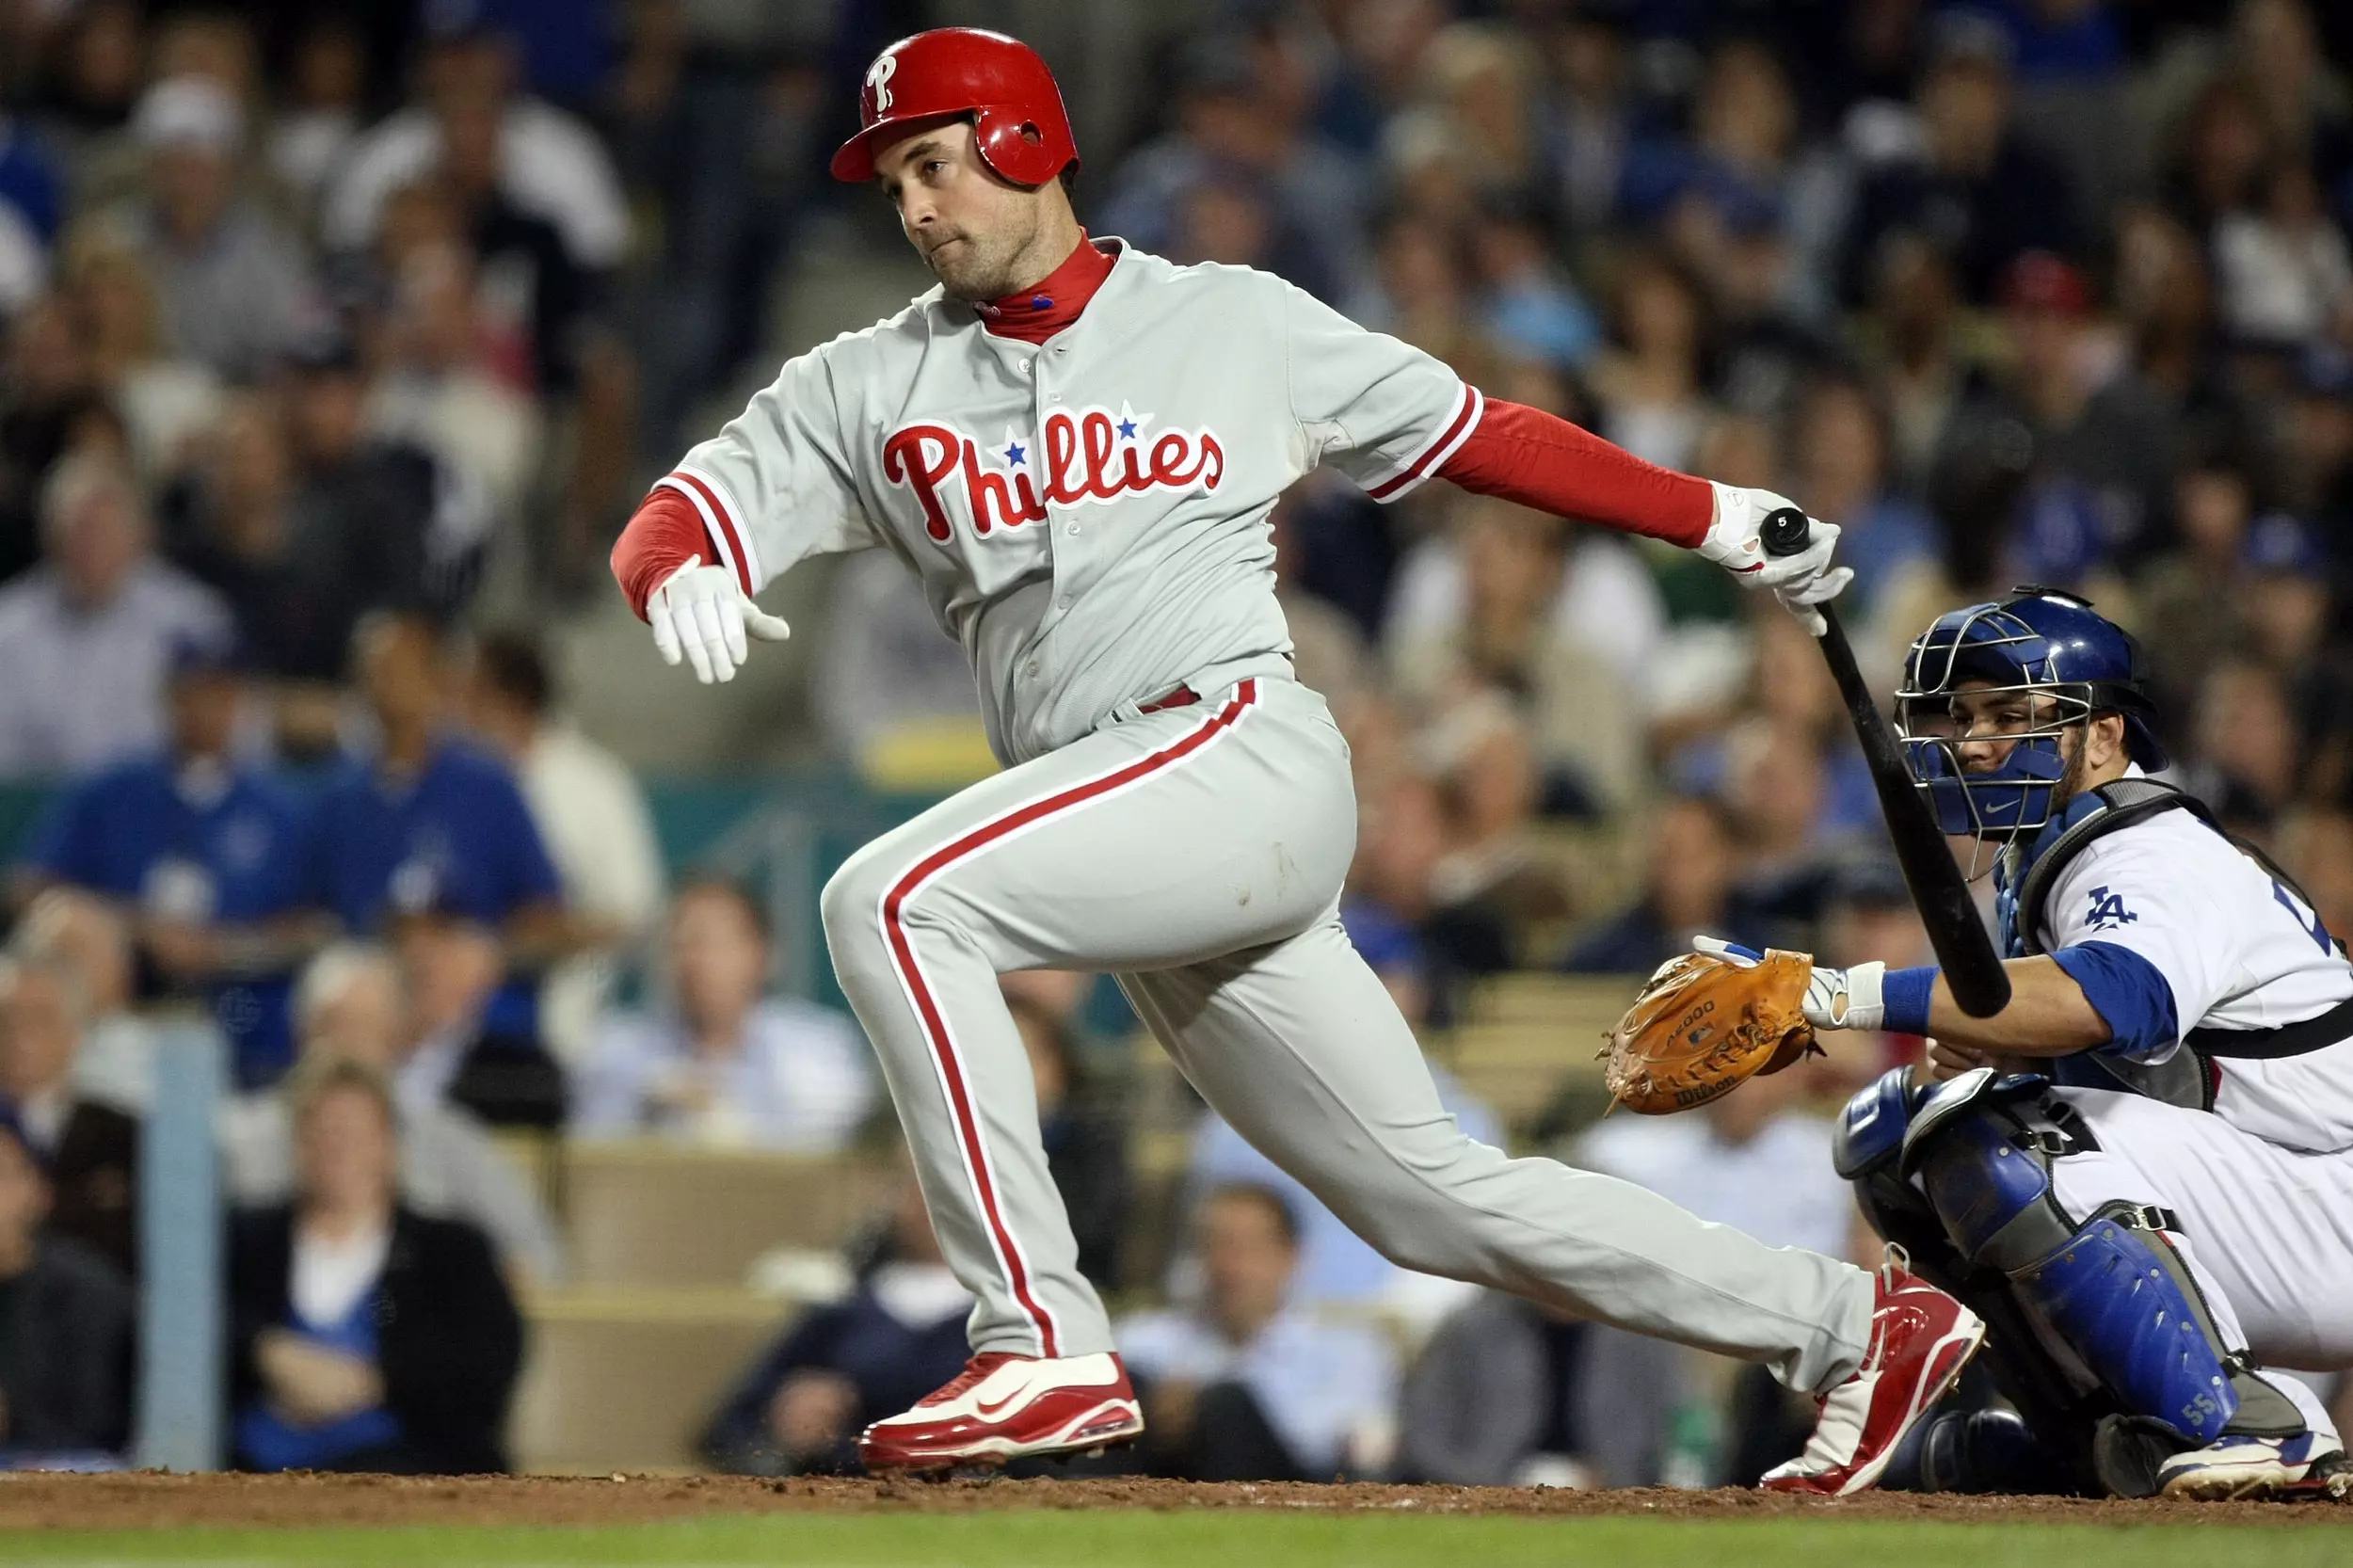 Phillies-Braves NLDS: Pat Burrell to throw out 1st pitch before Game 4 -  CBS Philadelphia